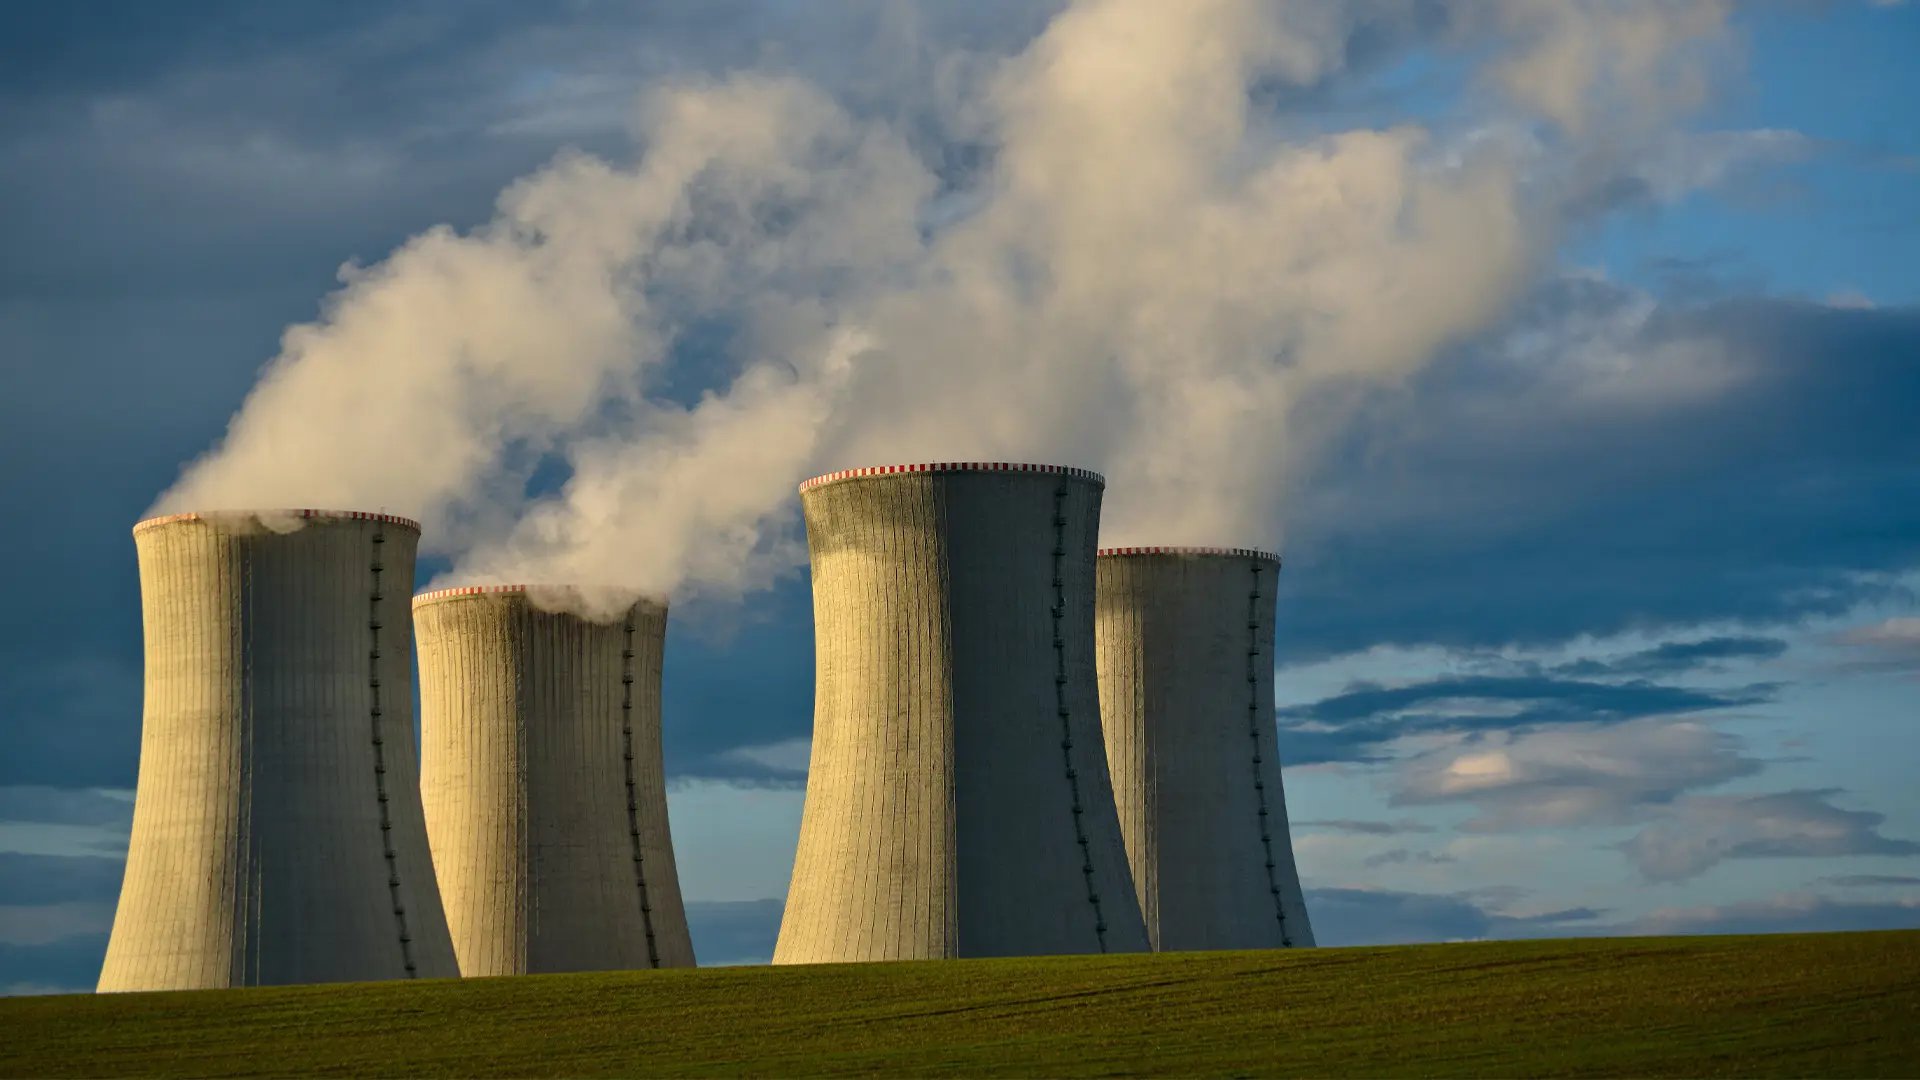 Detailimage on nuclear plants